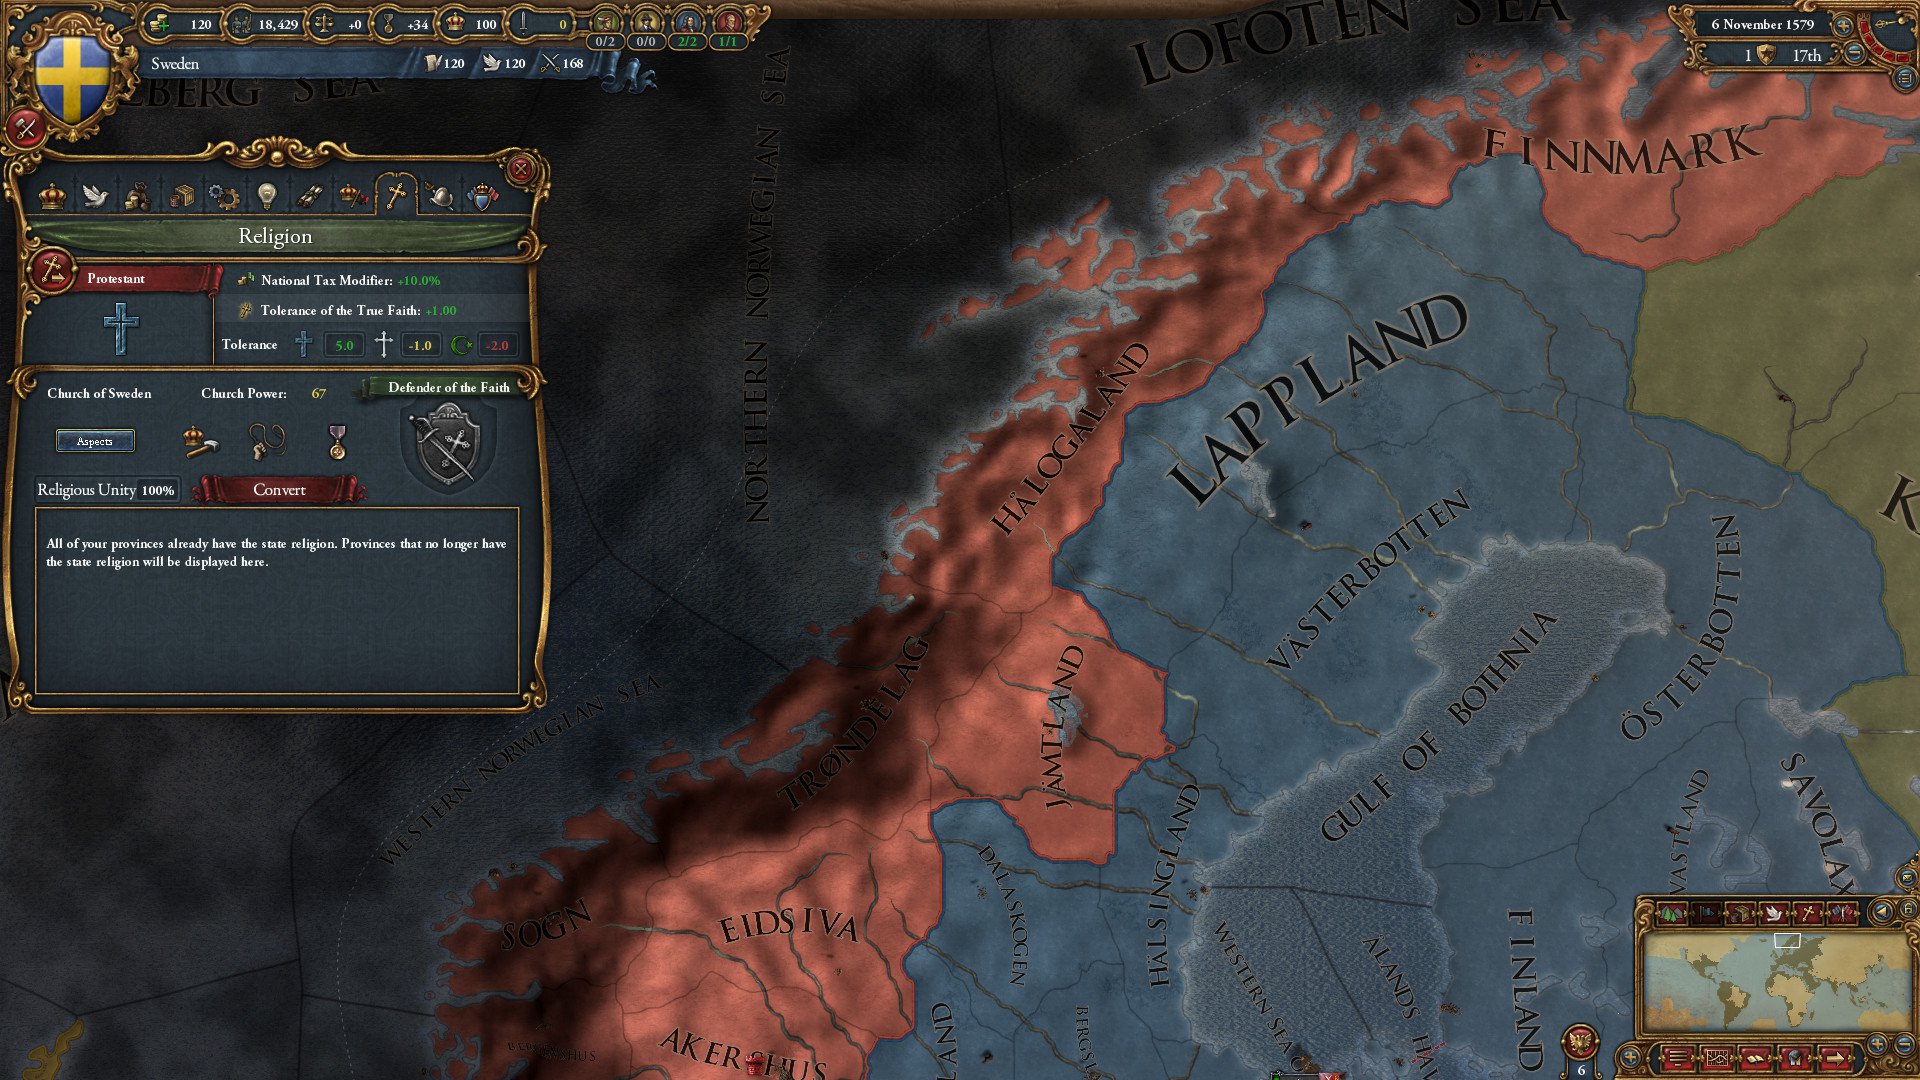 Europa Universalis IV Empire Founder Pack 4